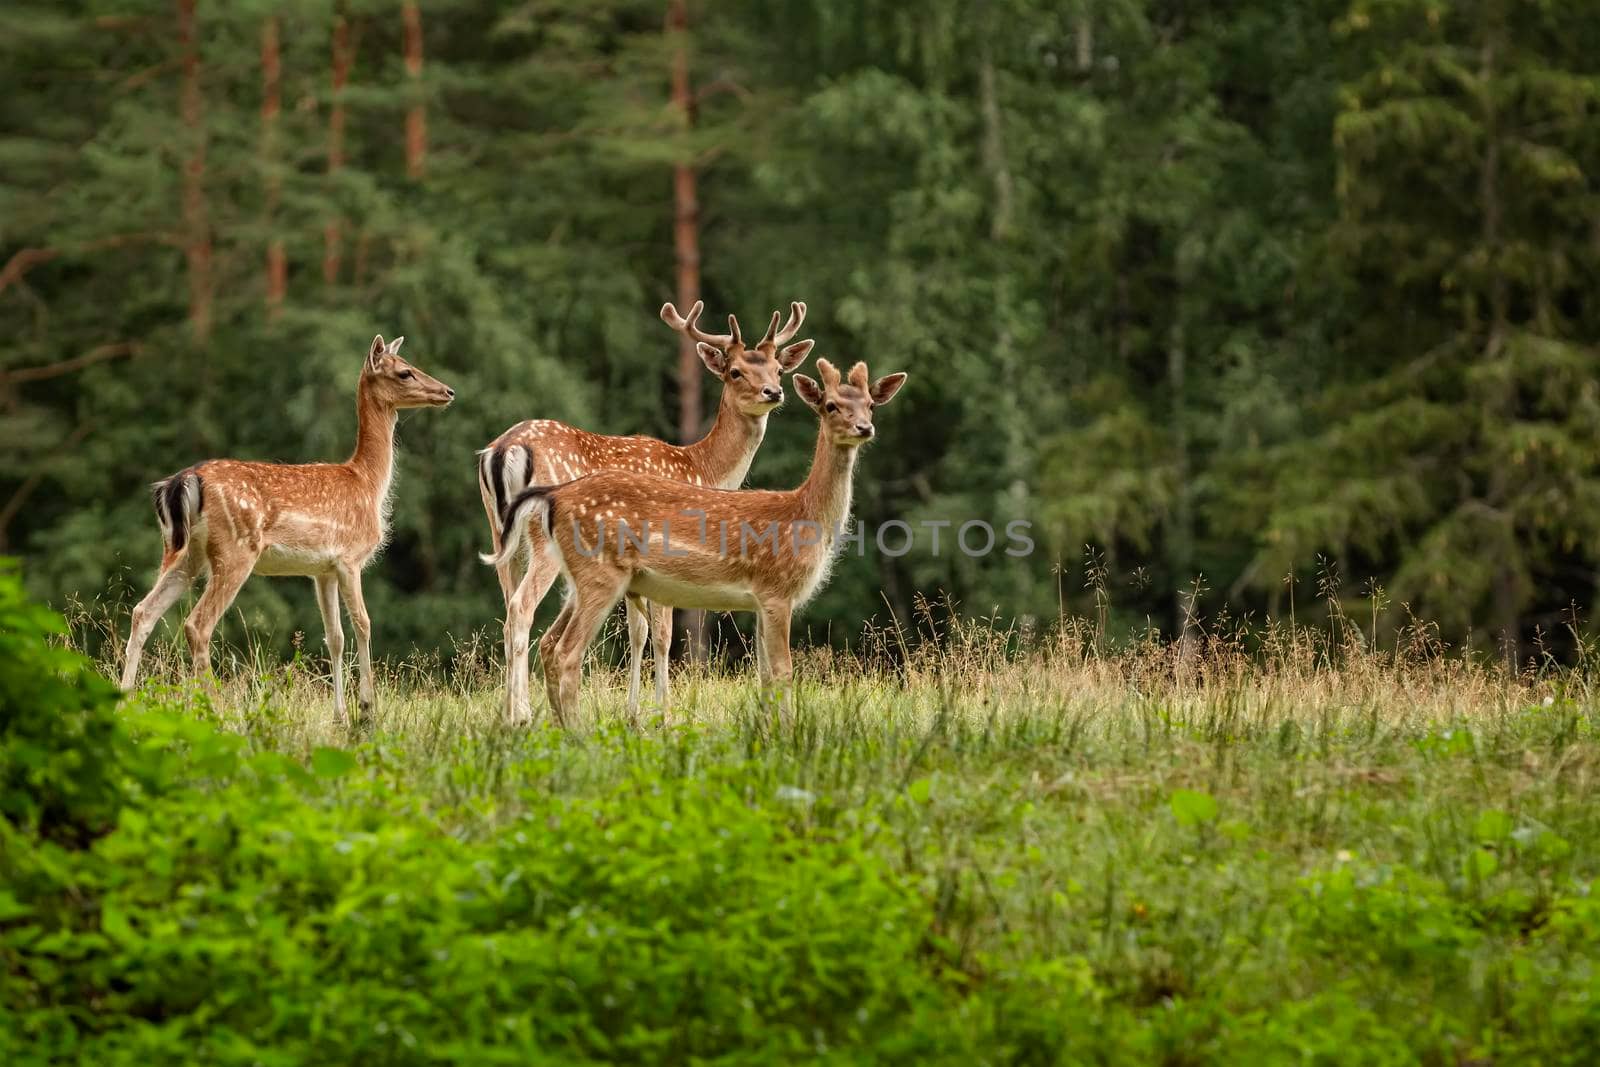 Deers with big horns resting near the forest